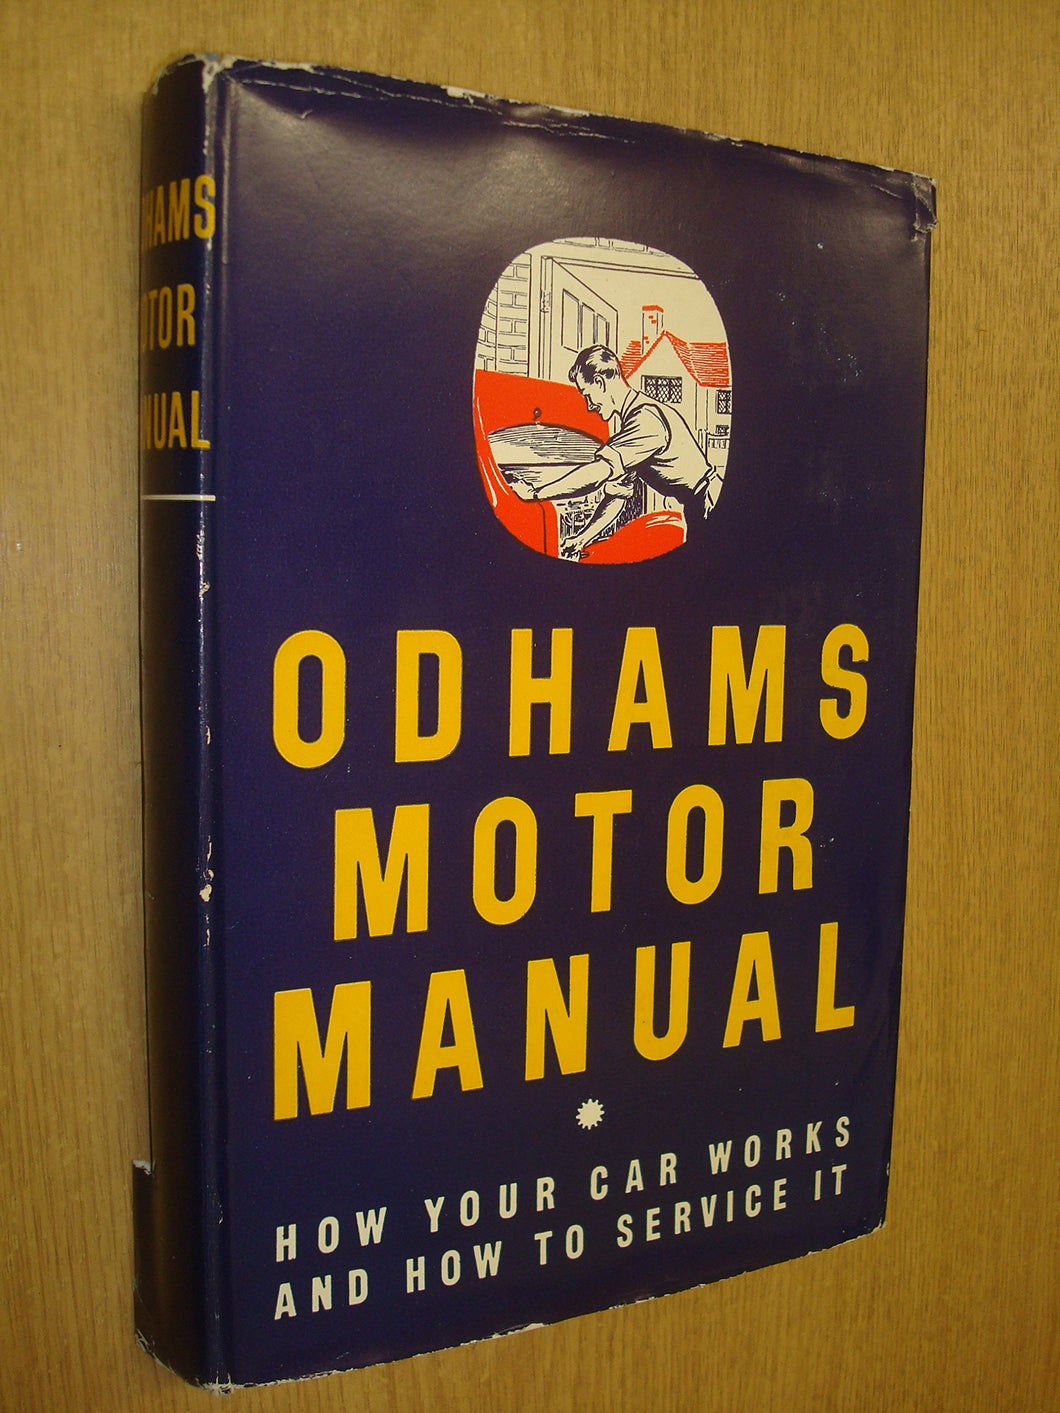 Odhams Motor Manual: How Your Car Works and How to Service It by Staton Abbey [Hardcover] Staton Abbey